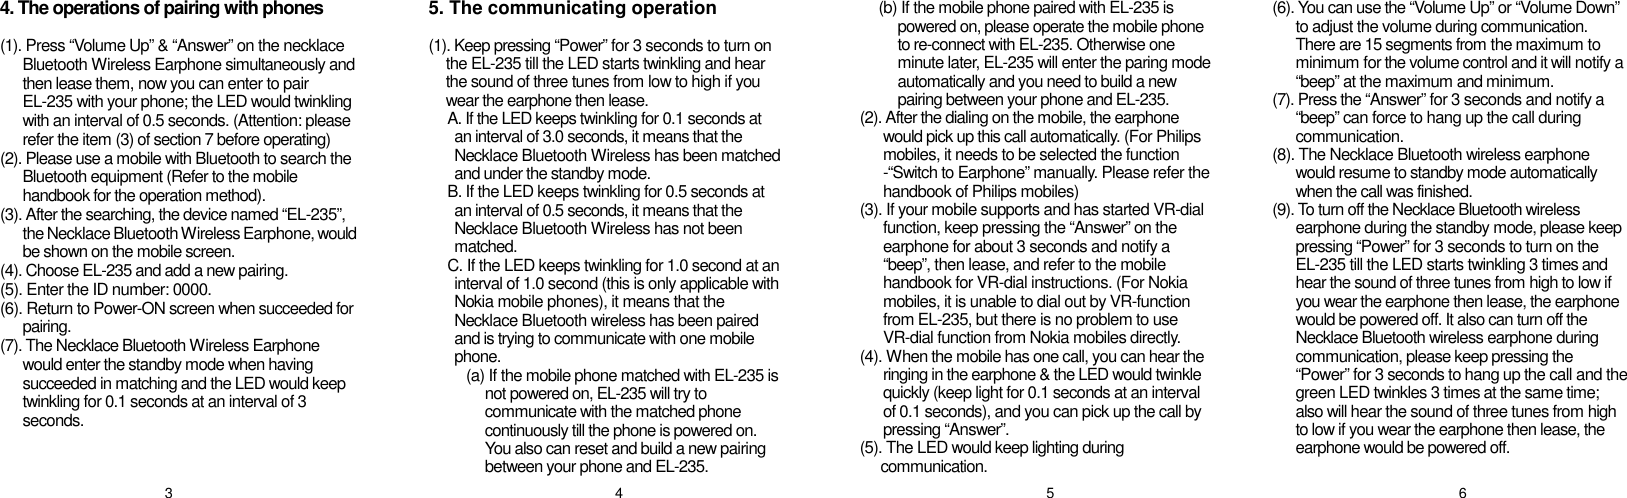 4. The operations of pairing with phones  (1). Press “Volume Up” &amp; “Answer” on the necklace Bluetooth Wireless Earphone simultaneously and then lease them, now you can enter to pair EL-235 with your phone; the LED would twinkling with an interval of 0.5 seconds. (Attention: please refer the item (3) of section 7 before operating) (2). Please use a mobile with Bluetooth to search the Bluetooth equipment (Refer to the mobile handbook for the operation method). (3). After the searching, the device named “EL-235”, the Necklace Bluetooth Wireless Earphone, would be shown on the mobile screen. (4). Choose EL-235 and add a new pairing. (5). Enter the ID number: 0000. (6). Return to Power-ON screen when succeeded for pairing. (7). The Necklace Bluetooth Wireless Earphone would enter the standby mode when having succeeded in matching and the LED would keep twinkling for 0.1 seconds at an interval of 3 seconds.   5. The communicating operation  (1). Keep pressing “Power” for 3 seconds to turn on the EL-235 till the LED starts twinkling and hear the sound of three tunes from low to high if you wear the earphone then lease. A. If the LED keeps twinkling for 0.1 seconds at    an interval of 3.0 seconds, it means that the    Necklace Bluetooth Wireless has been matched   and under the standby mode.  B. If the LED keeps twinkling for 0.5 seconds at   an interval of 0.5 seconds, it means that the   Necklace Bluetooth Wireless has not been   matched. C. If the LED keeps twinkling for 1.0 second at an   interval of 1.0 second (this is only applicable with   Nokia mobile phones), it means that the   Necklace Bluetooth wireless has been paired   and is trying to communicate with one mobile   phone. (a) If the mobile phone matched with EL-235 is not powered on, EL-235 will try to communicate with the matched phone continuously till the phone is powered on. You also can reset and build a new pairing between your phone and EL-235. (b) If the mobile phone paired with EL-235 is powered on, please operate the mobile phone to re-connect with EL-235. Otherwise one minute later, EL-235 will enter the paring mode automatically and you need to build a new pairing between your phone and EL-235. (2). After the dialing on the mobile, the earphone would pick up this call automatically. (For Philips mobiles, it needs to be selected the function -“Switch to Earphone” manually. Please refer the handbook of Philips mobiles) (3). If your mobile supports and has started VR-dial function, keep pressing the “Answer” on the earphone for about 3 seconds and notify a “beep”, then lease, and refer to the mobile handbook for VR-dial instructions. (For Nokia mobiles, it is unable to dial out by VR-function from EL-235, but there is no problem to use VR-dial function from Nokia mobiles directly. (4). When the mobile has one call, you can hear the ringing in the earphone &amp; the LED would twinkle quickly (keep light for 0.1 seconds at an interval of 0.1 seconds), and you can pick up the call by pressing “Answer”. (5). The LED would keep lighting during communication. (6). You can use the “Volume Up” or “Volume Down” to adjust the volume during communication. There are 15 segments from the maximum to minimum for the volume control and it will notify a “beep” at the maximum and minimum. (7). Press the “Answer” for 3 seconds and notify a “beep” can force to hang up the call during communication. (8). The Necklace Bluetooth wireless earphone would resume to standby mode automatically when the call was finished. (9). To turn off the Necklace Bluetooth wireless earphone during the standby mode, please keep pressing “Power” for 3 seconds to turn on the EL-235 till the LED starts twinkling 3 times and hear the sound of three tunes from high to low if you wear the earphone then lease, the earphone would be powered off. It also can turn off the Necklace Bluetooth wireless earphone during communication, please keep pressing the “Power” for 3 seconds to hang up the call and the green LED twinkles 3 times at the same time; also will hear the sound of three tunes from high to low if you wear the earphone then lease, the earphone would be powered off.  3  4  5  6 